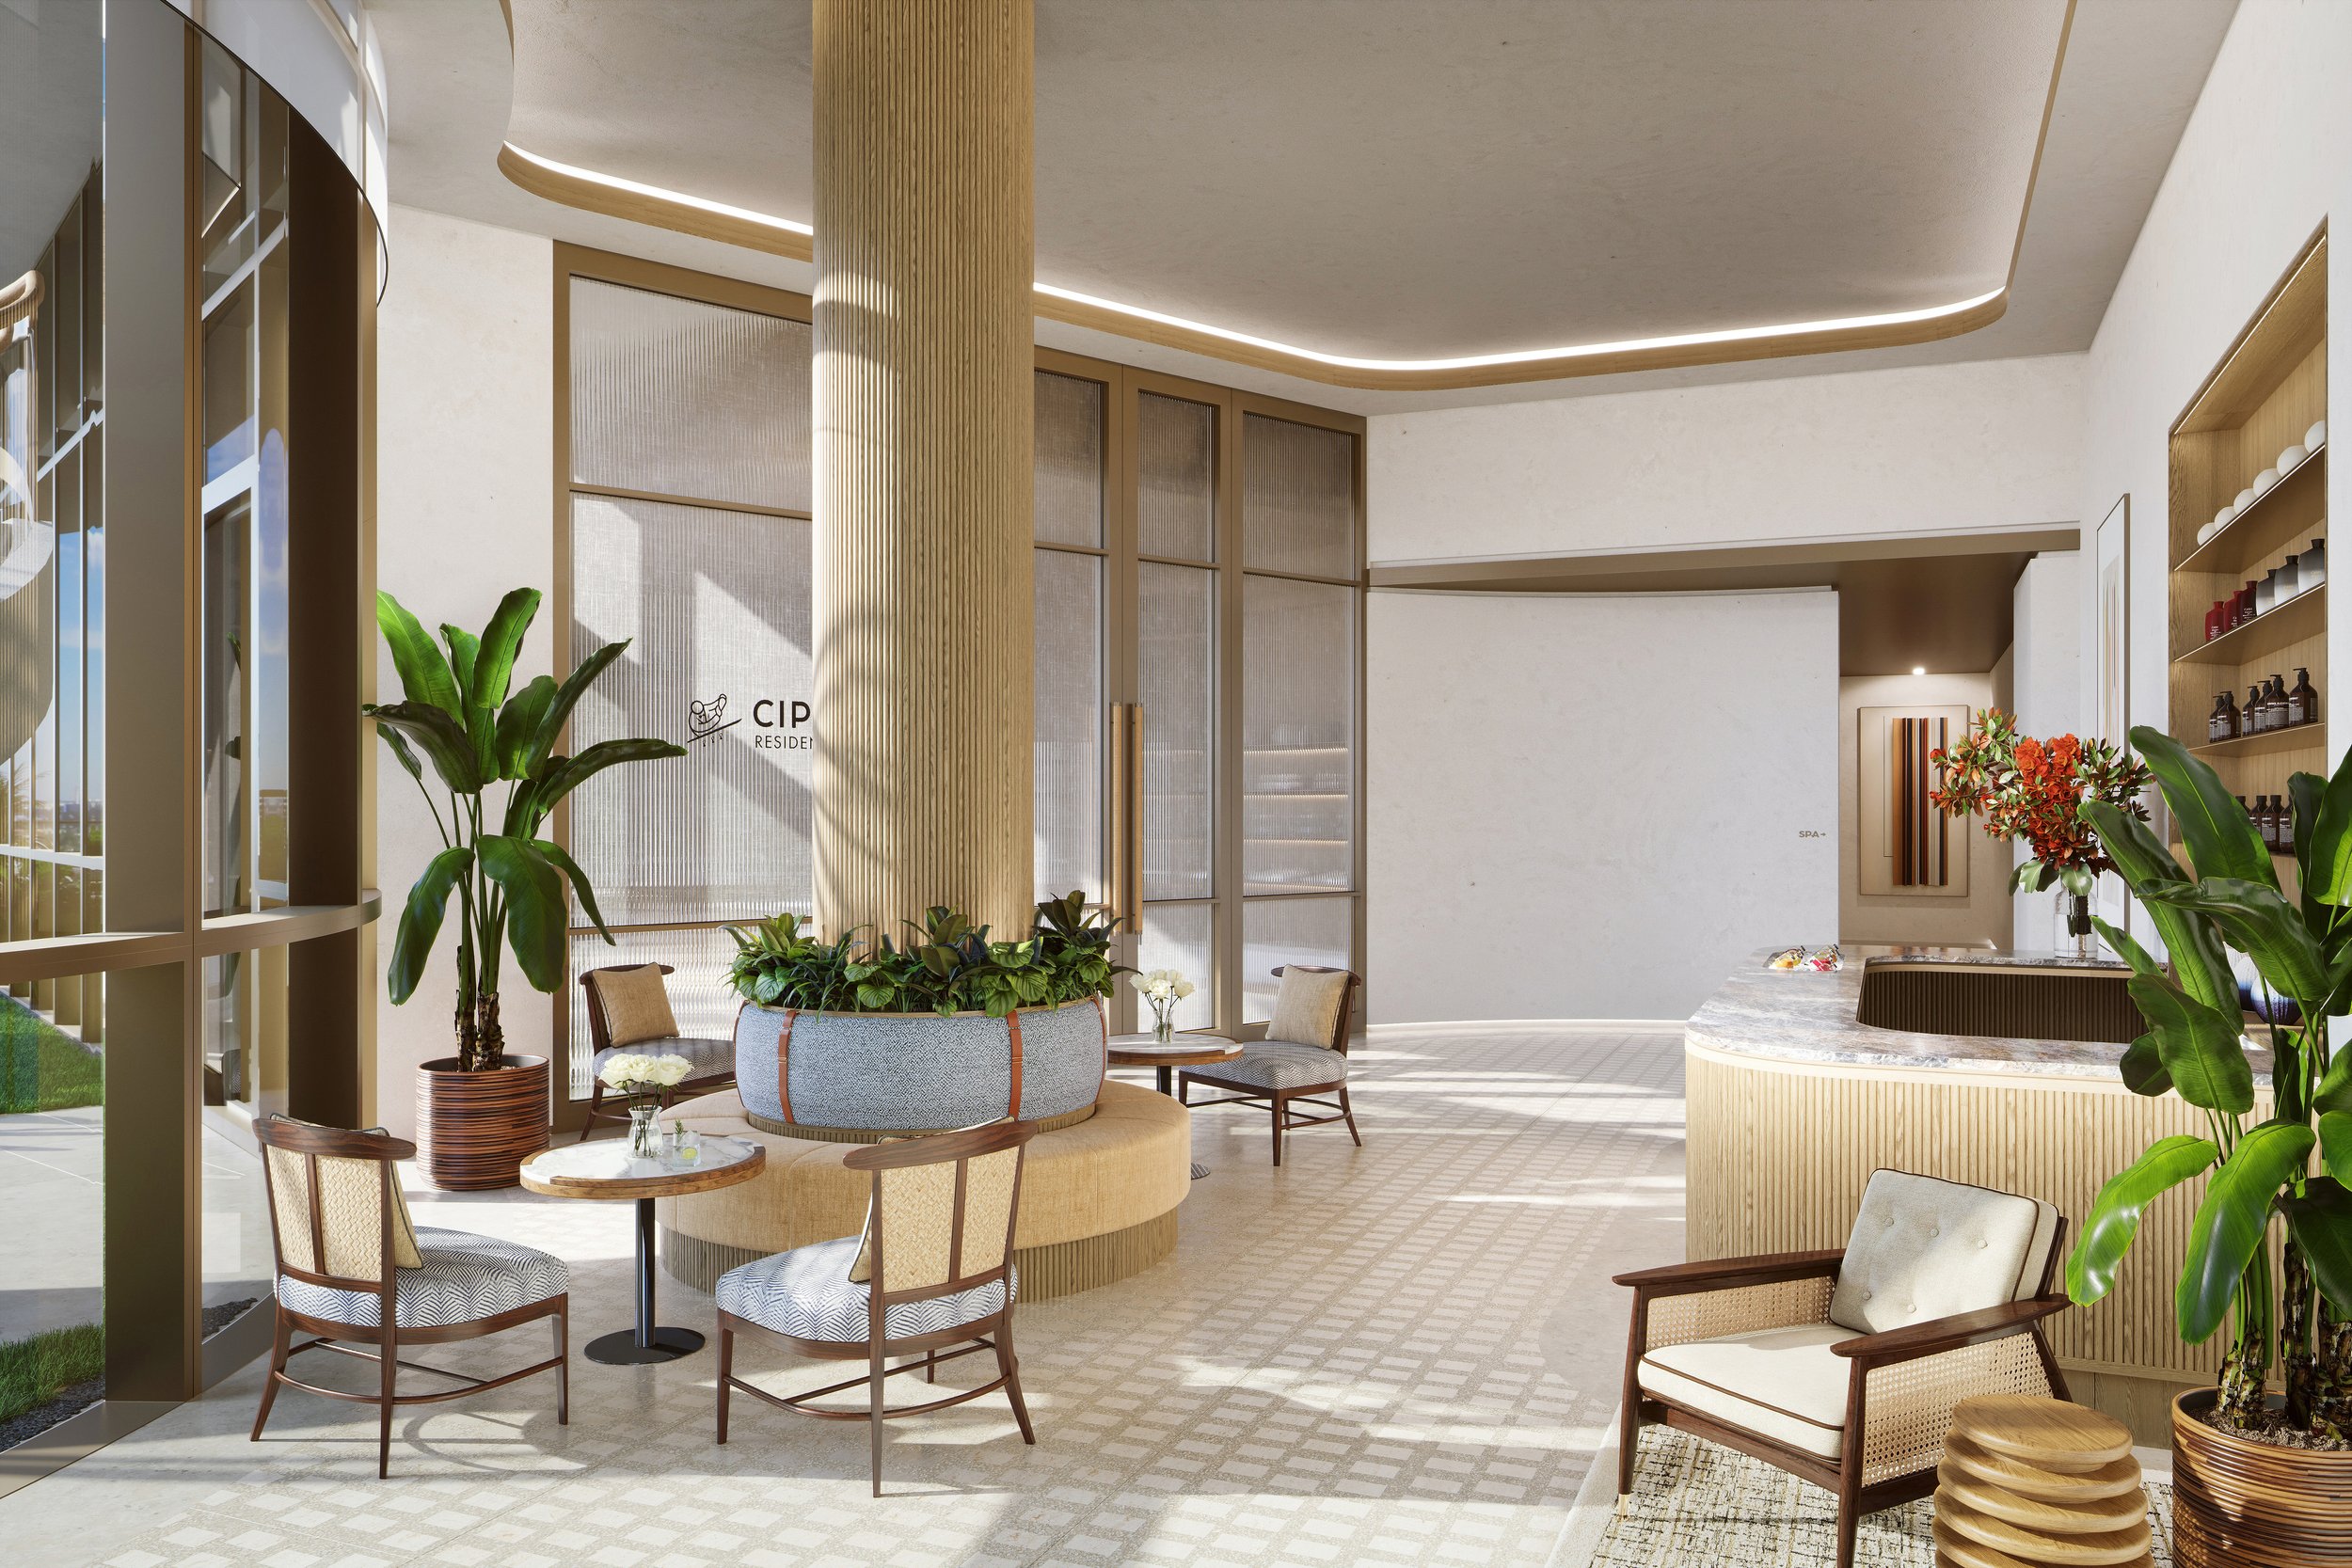 Cipriani Residences Miami Reveals First Look At Interiors By 1508 London 6.jpg